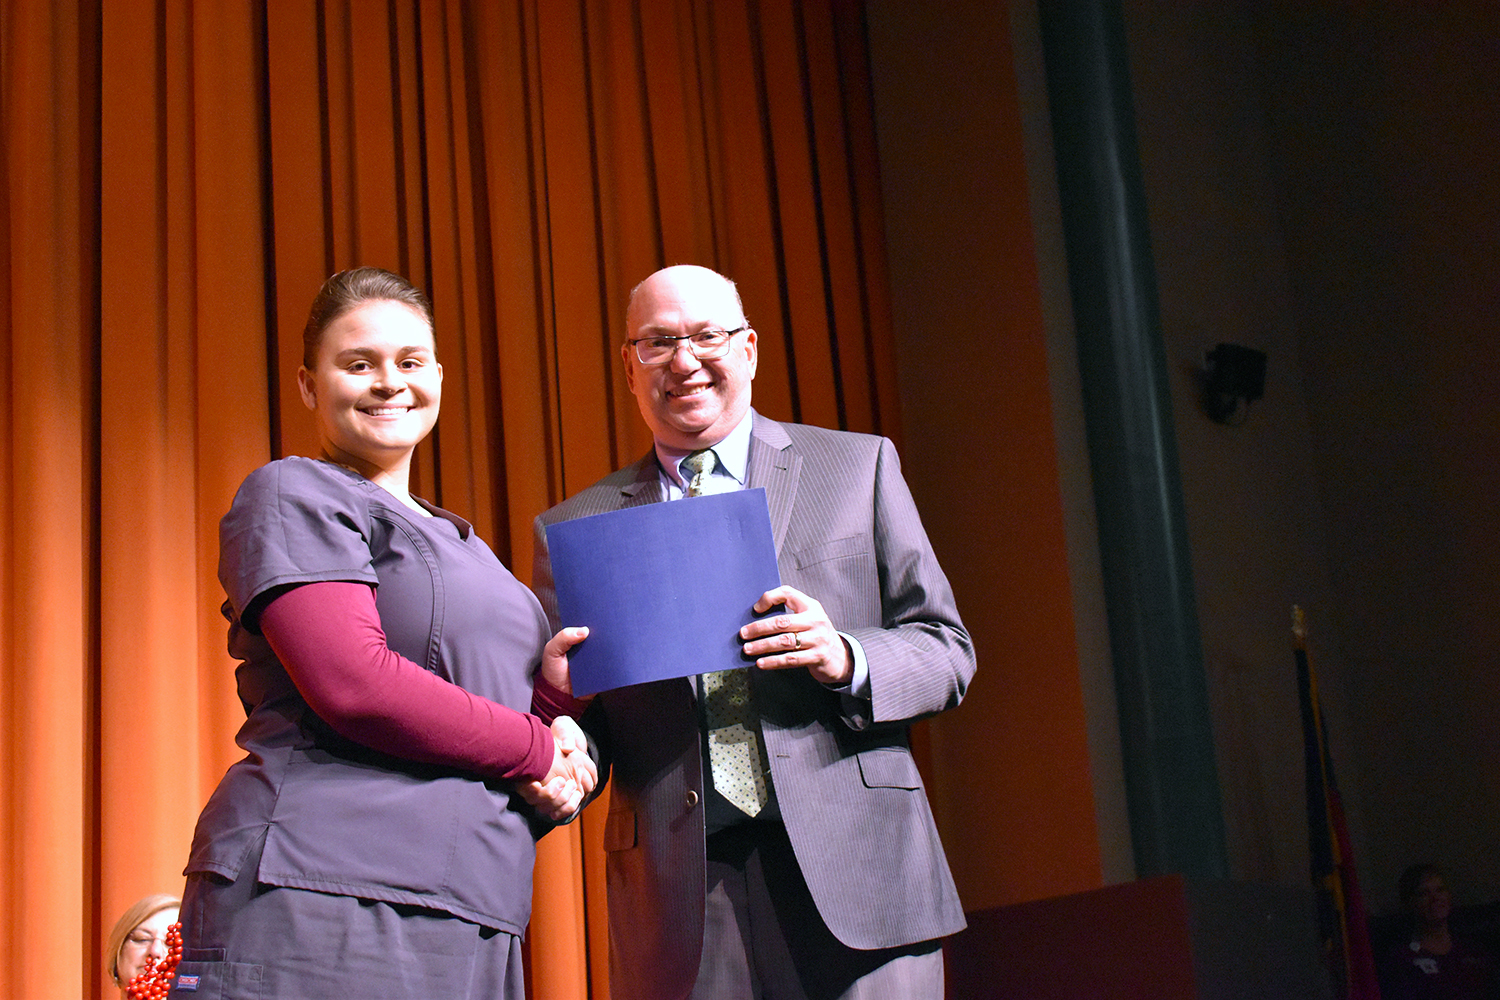 Nursing Assistant student receives certificate and shakes hands with College president